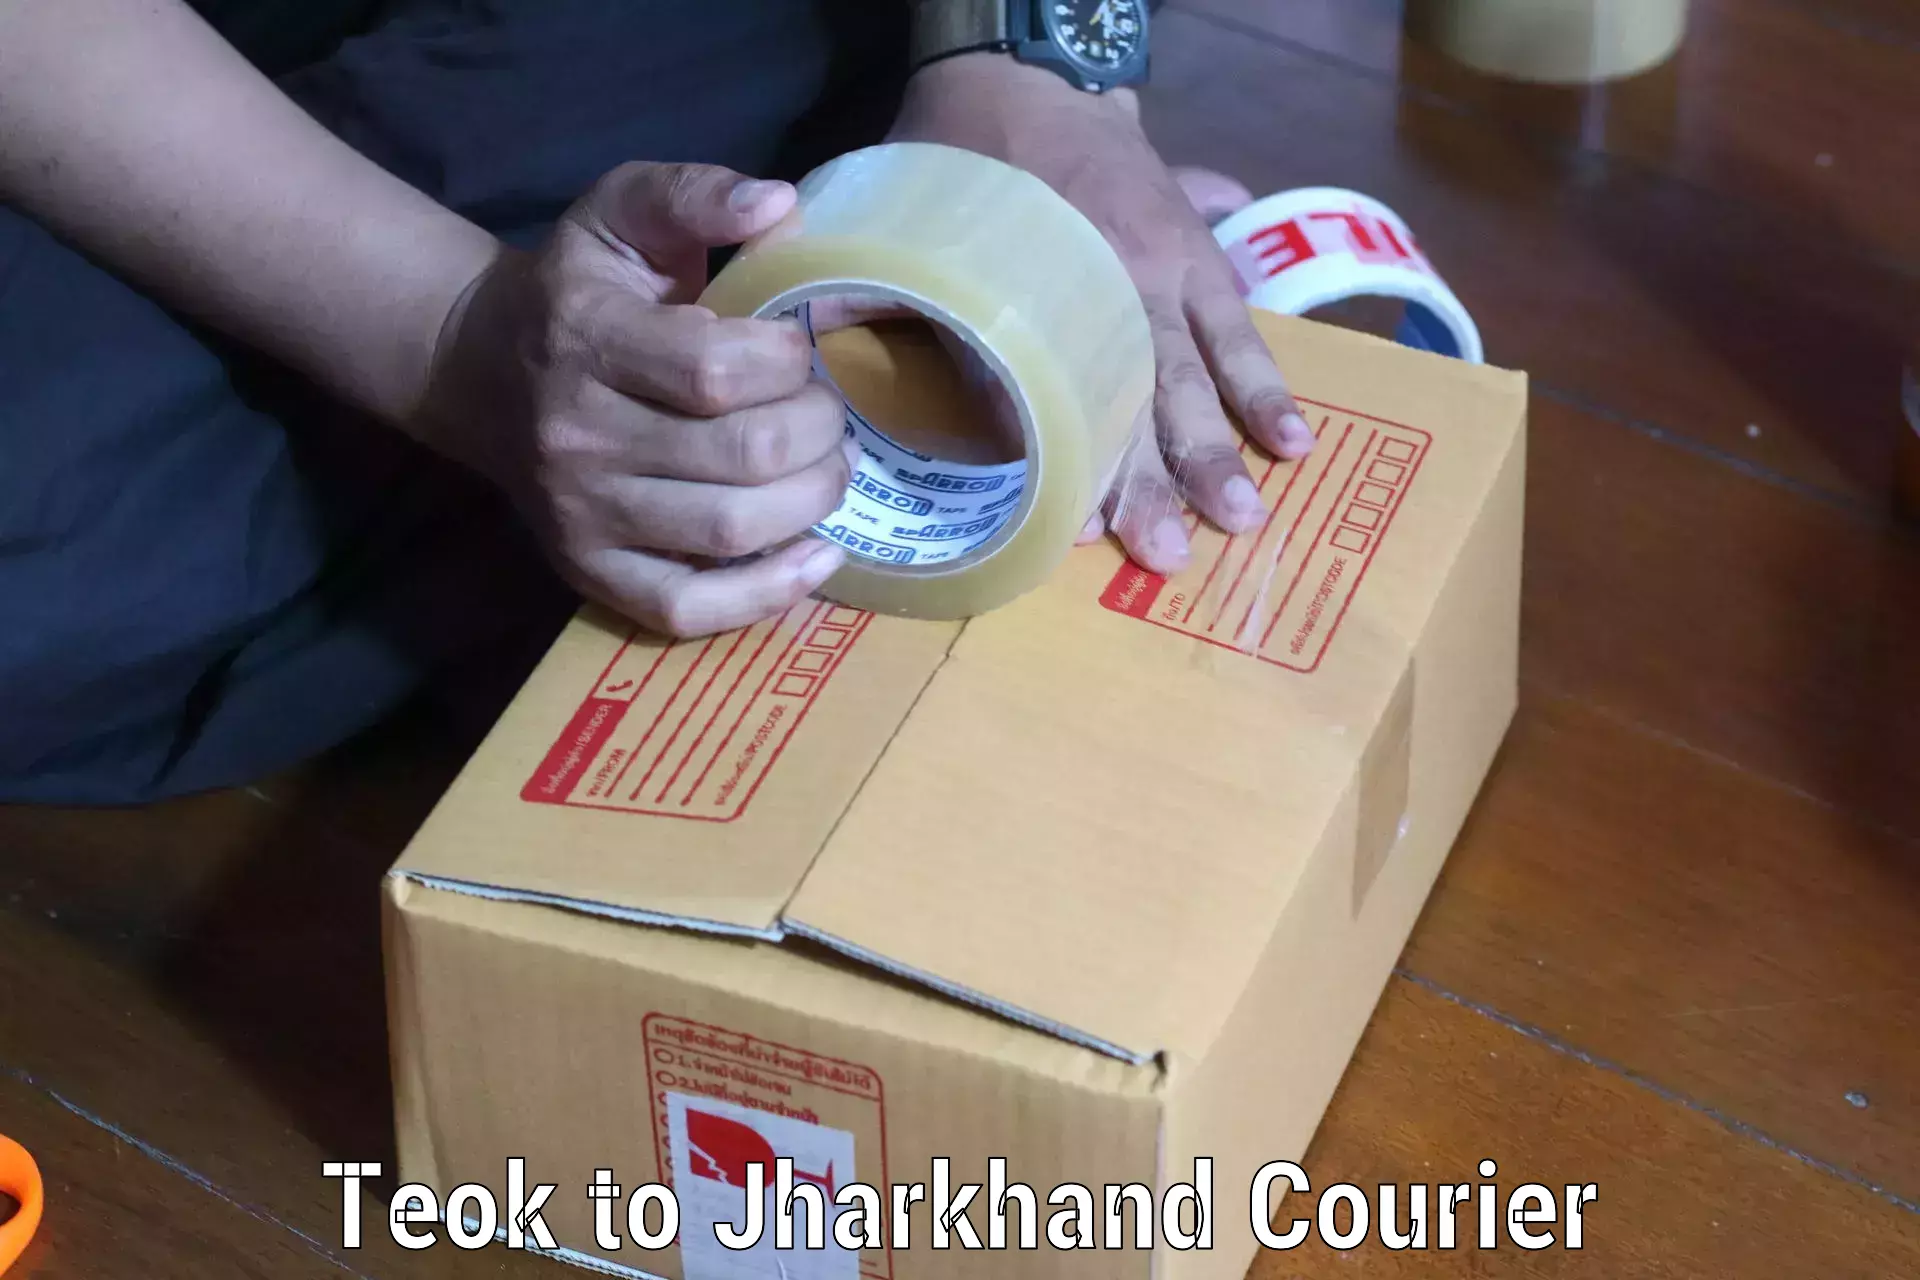 Business delivery service Teok to Domchanch